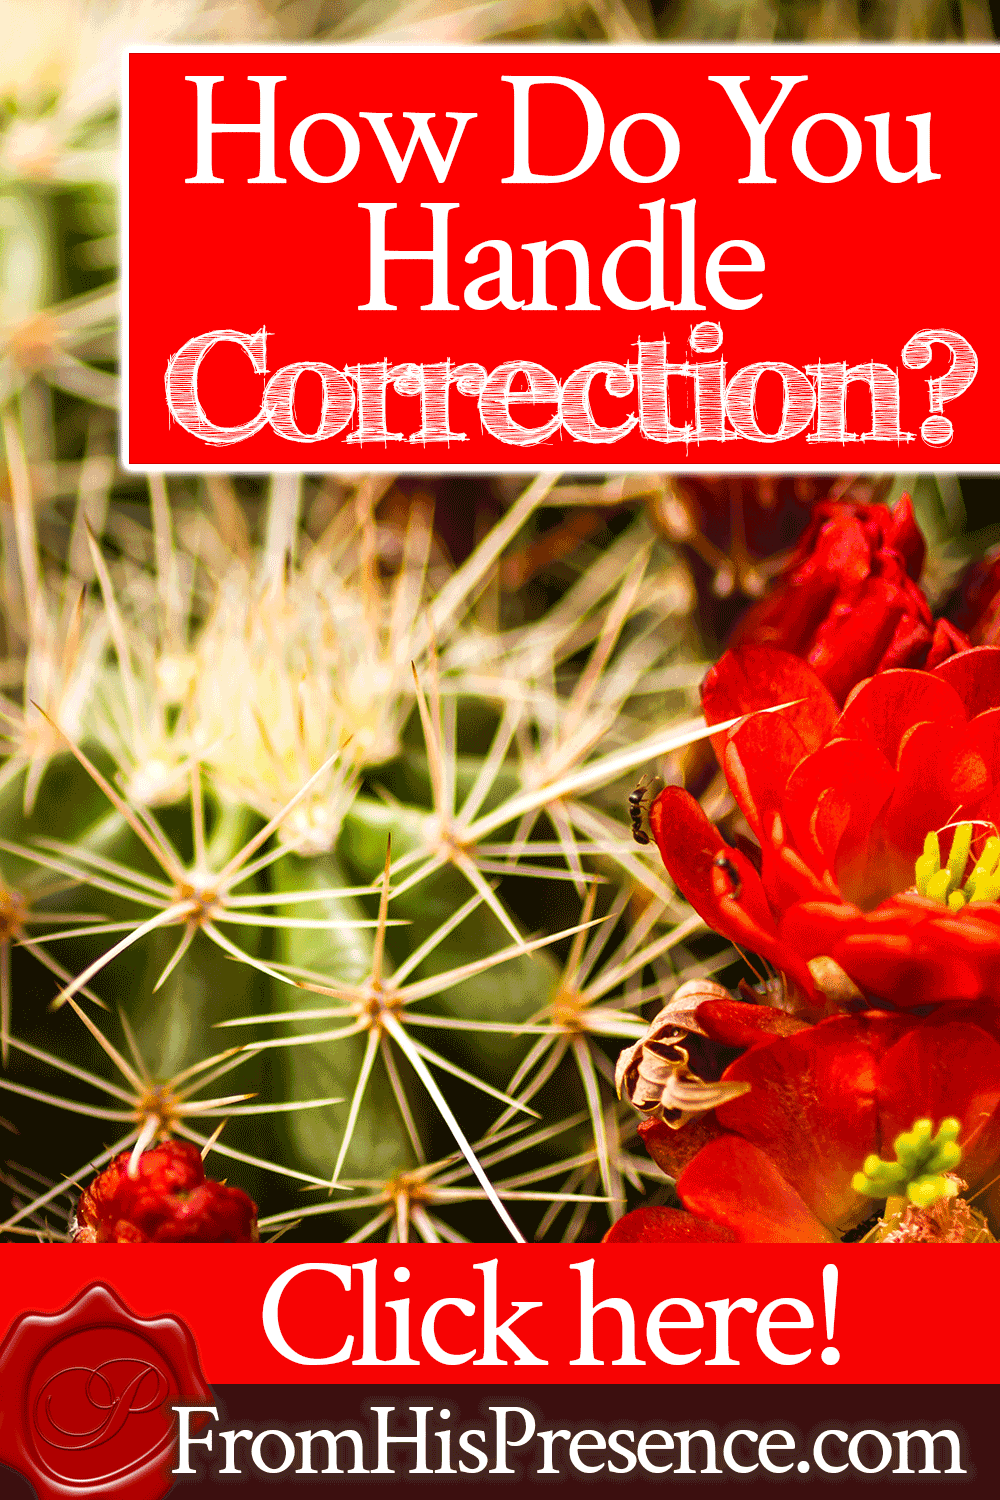 How Do You Handle Correction? | FromHisPresence.com | by Jamie Rohrbaugh